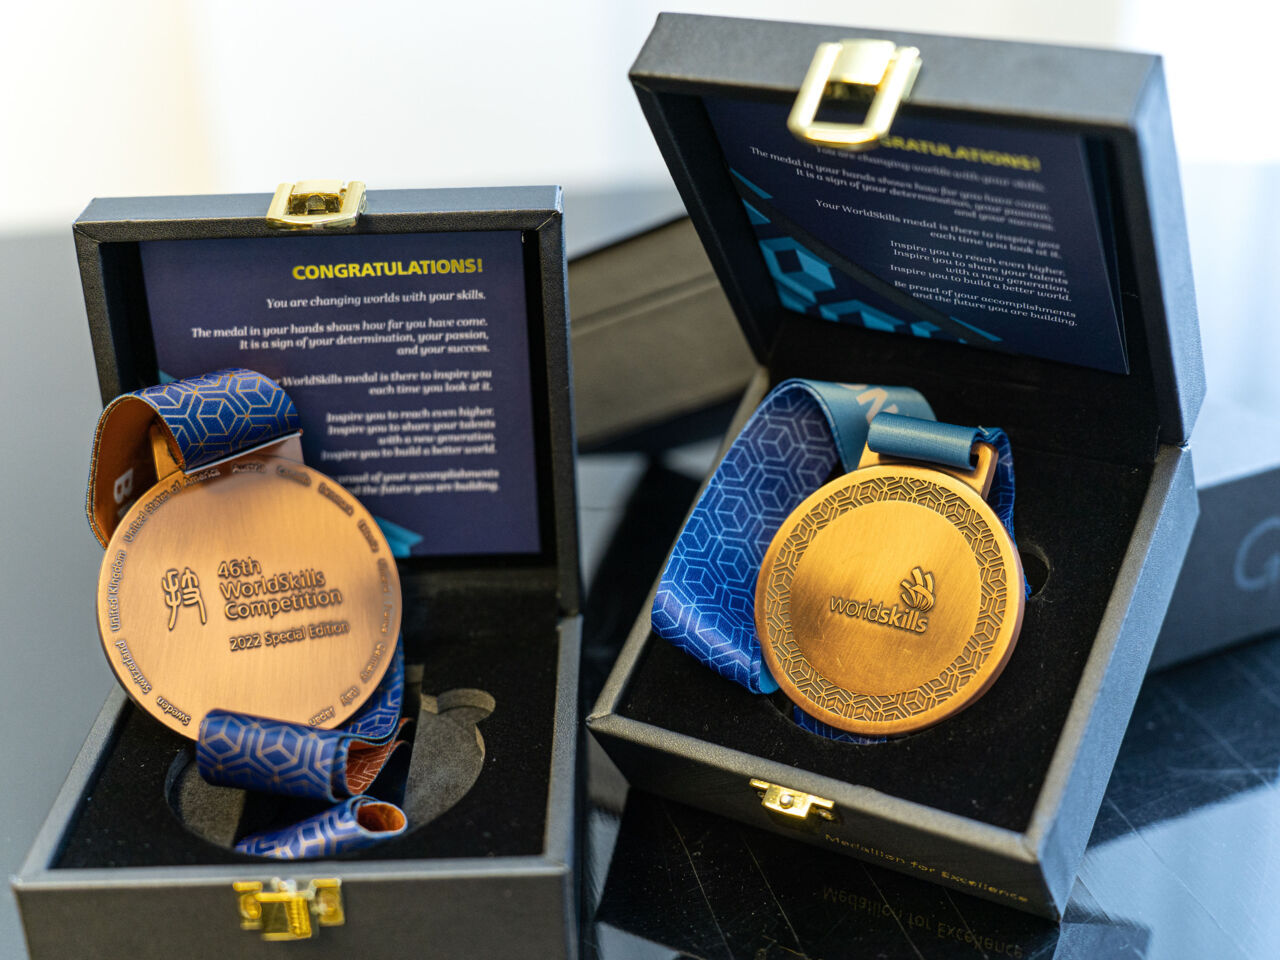 A close-up of two WorldSkills Competition 2022 Special Edition medals in their cases. The one on the left shows the front of the medal, while the one of the right shows the back.